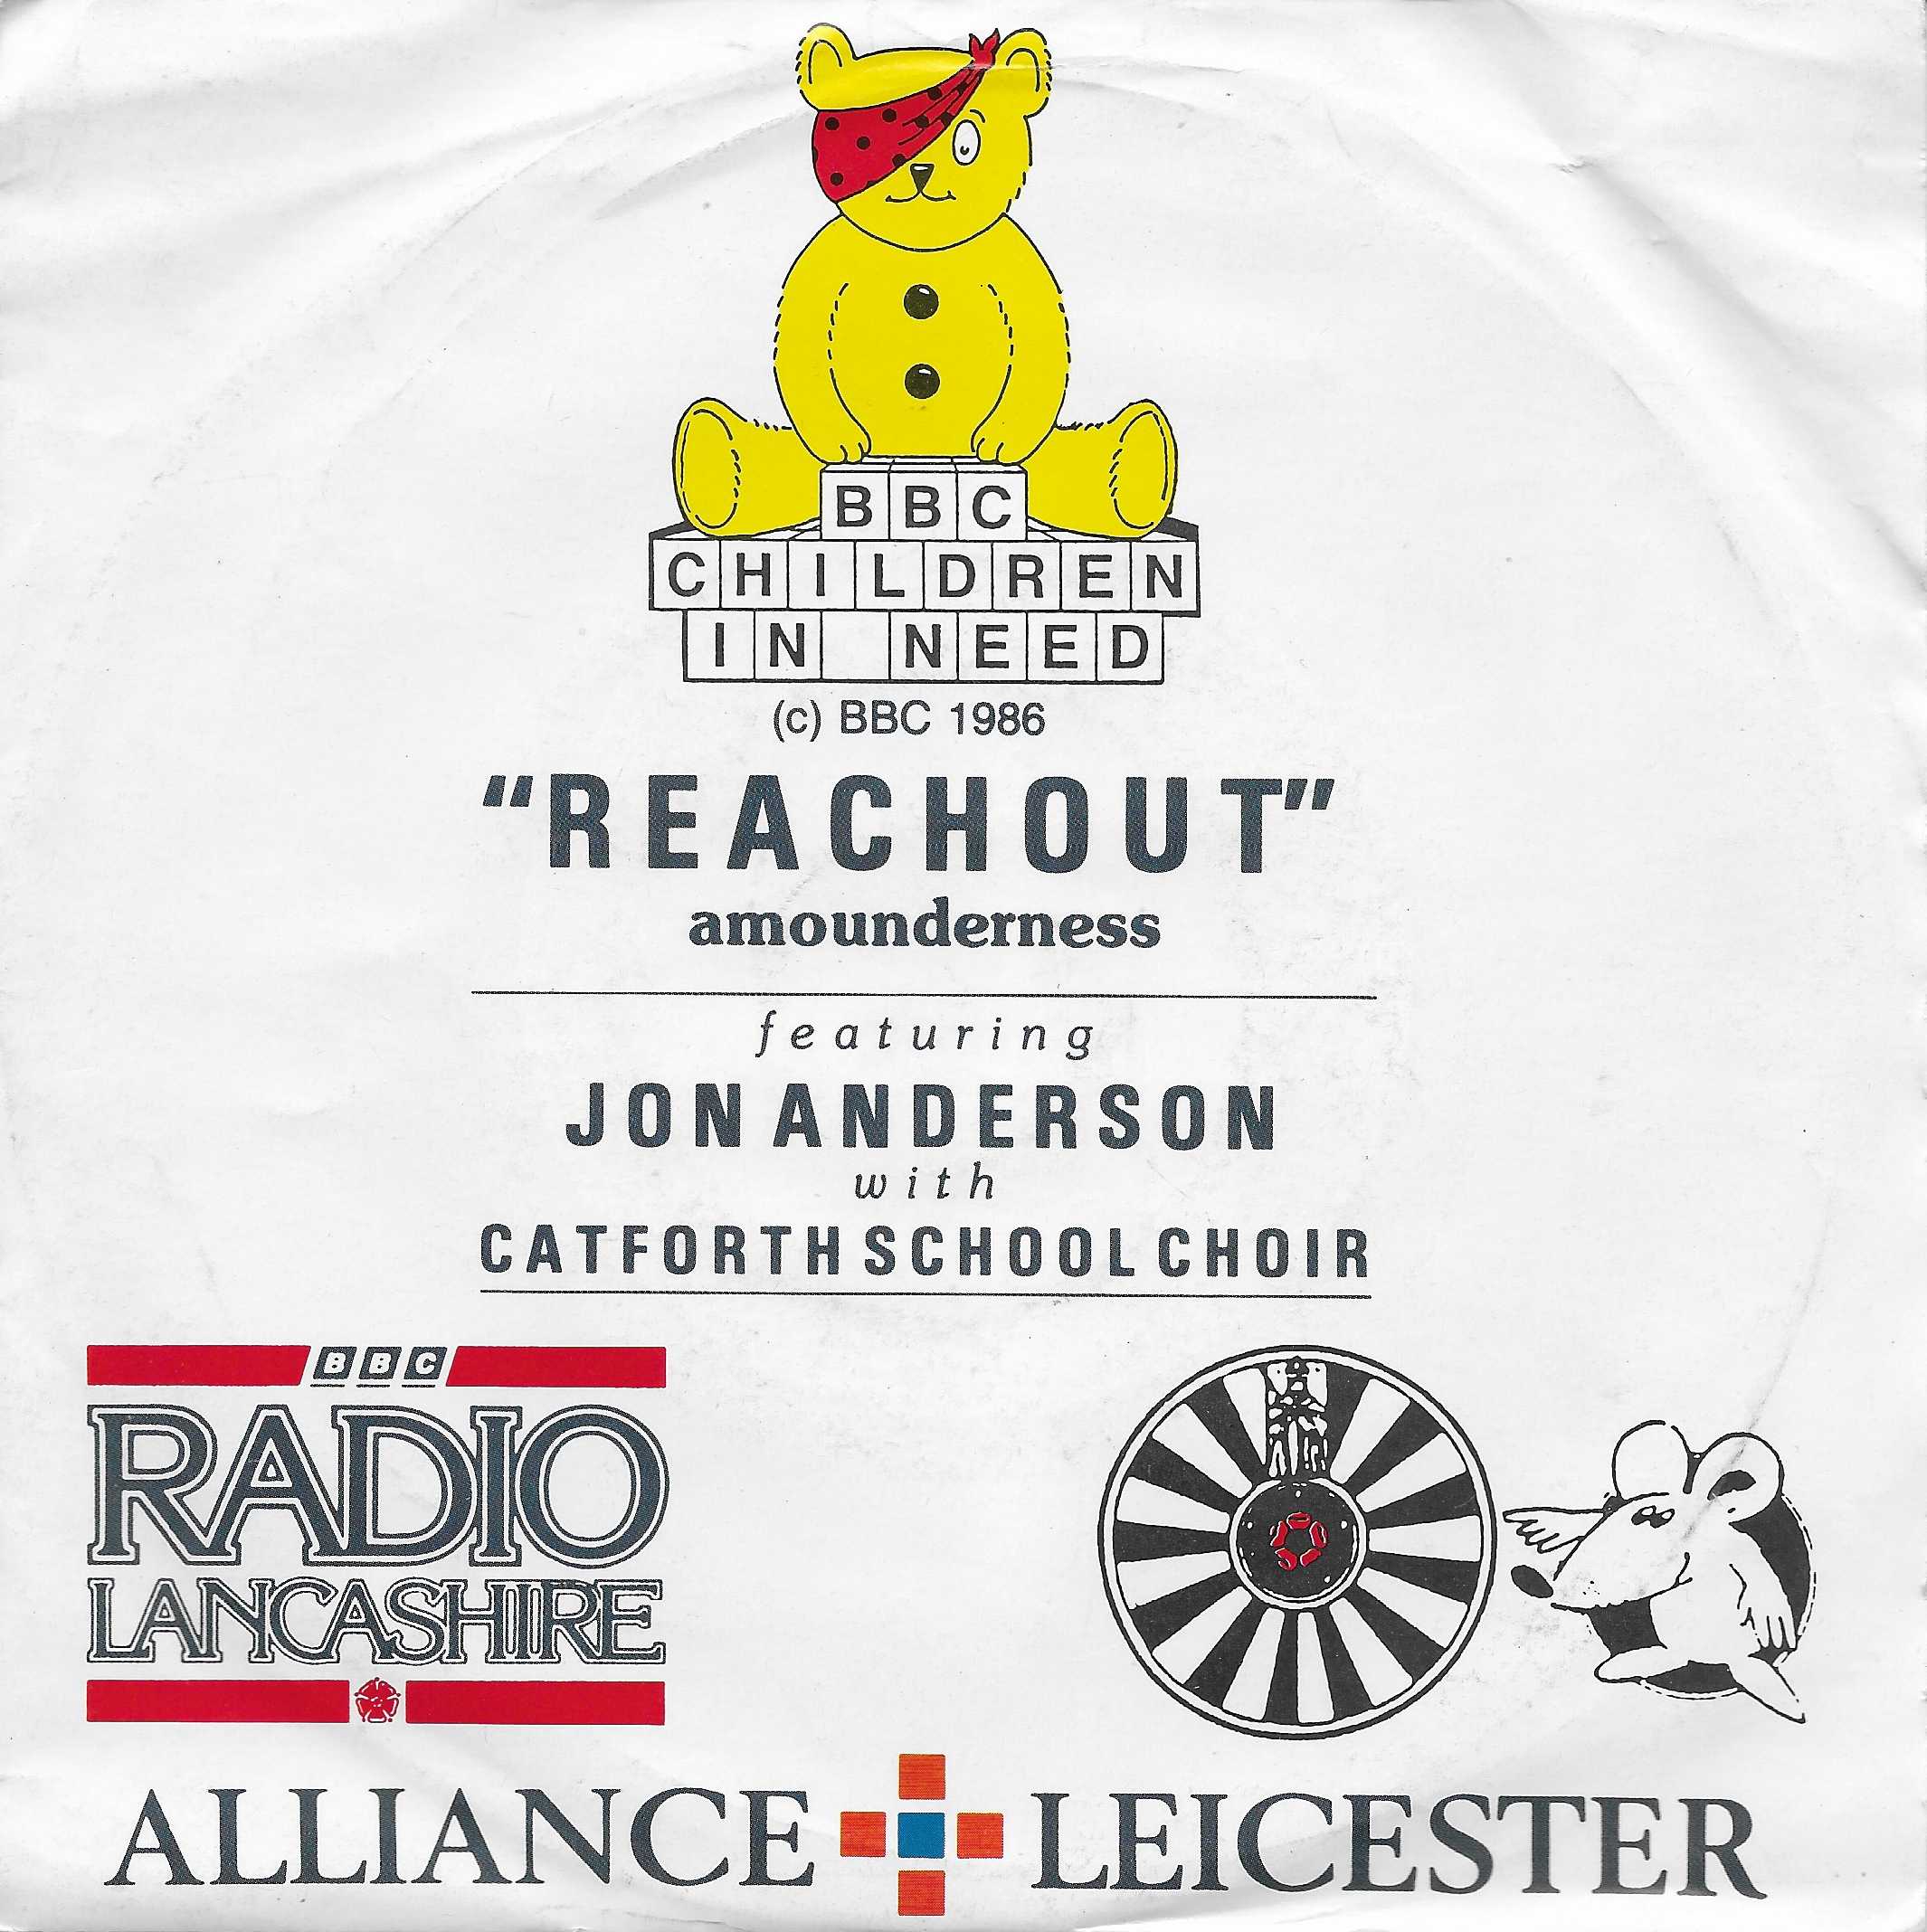 Picture of RLS 97 Reachout (BBC children in need) single by artist Price / Green from the BBC records and Tapes library